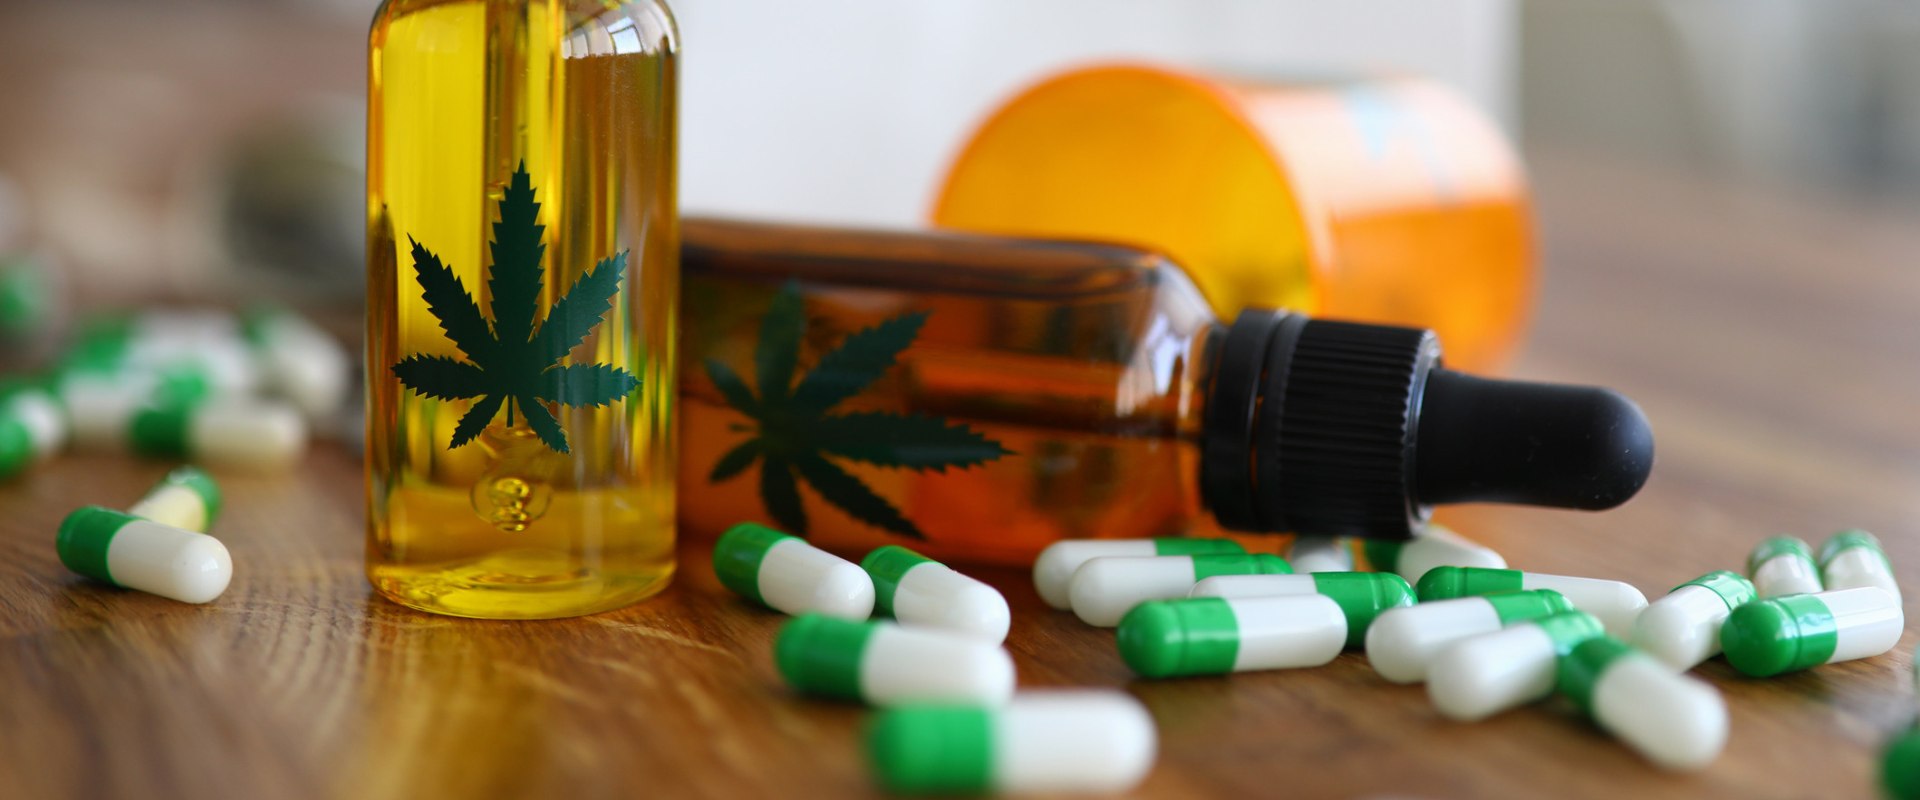 Does cbd oil get rid of joint pain?